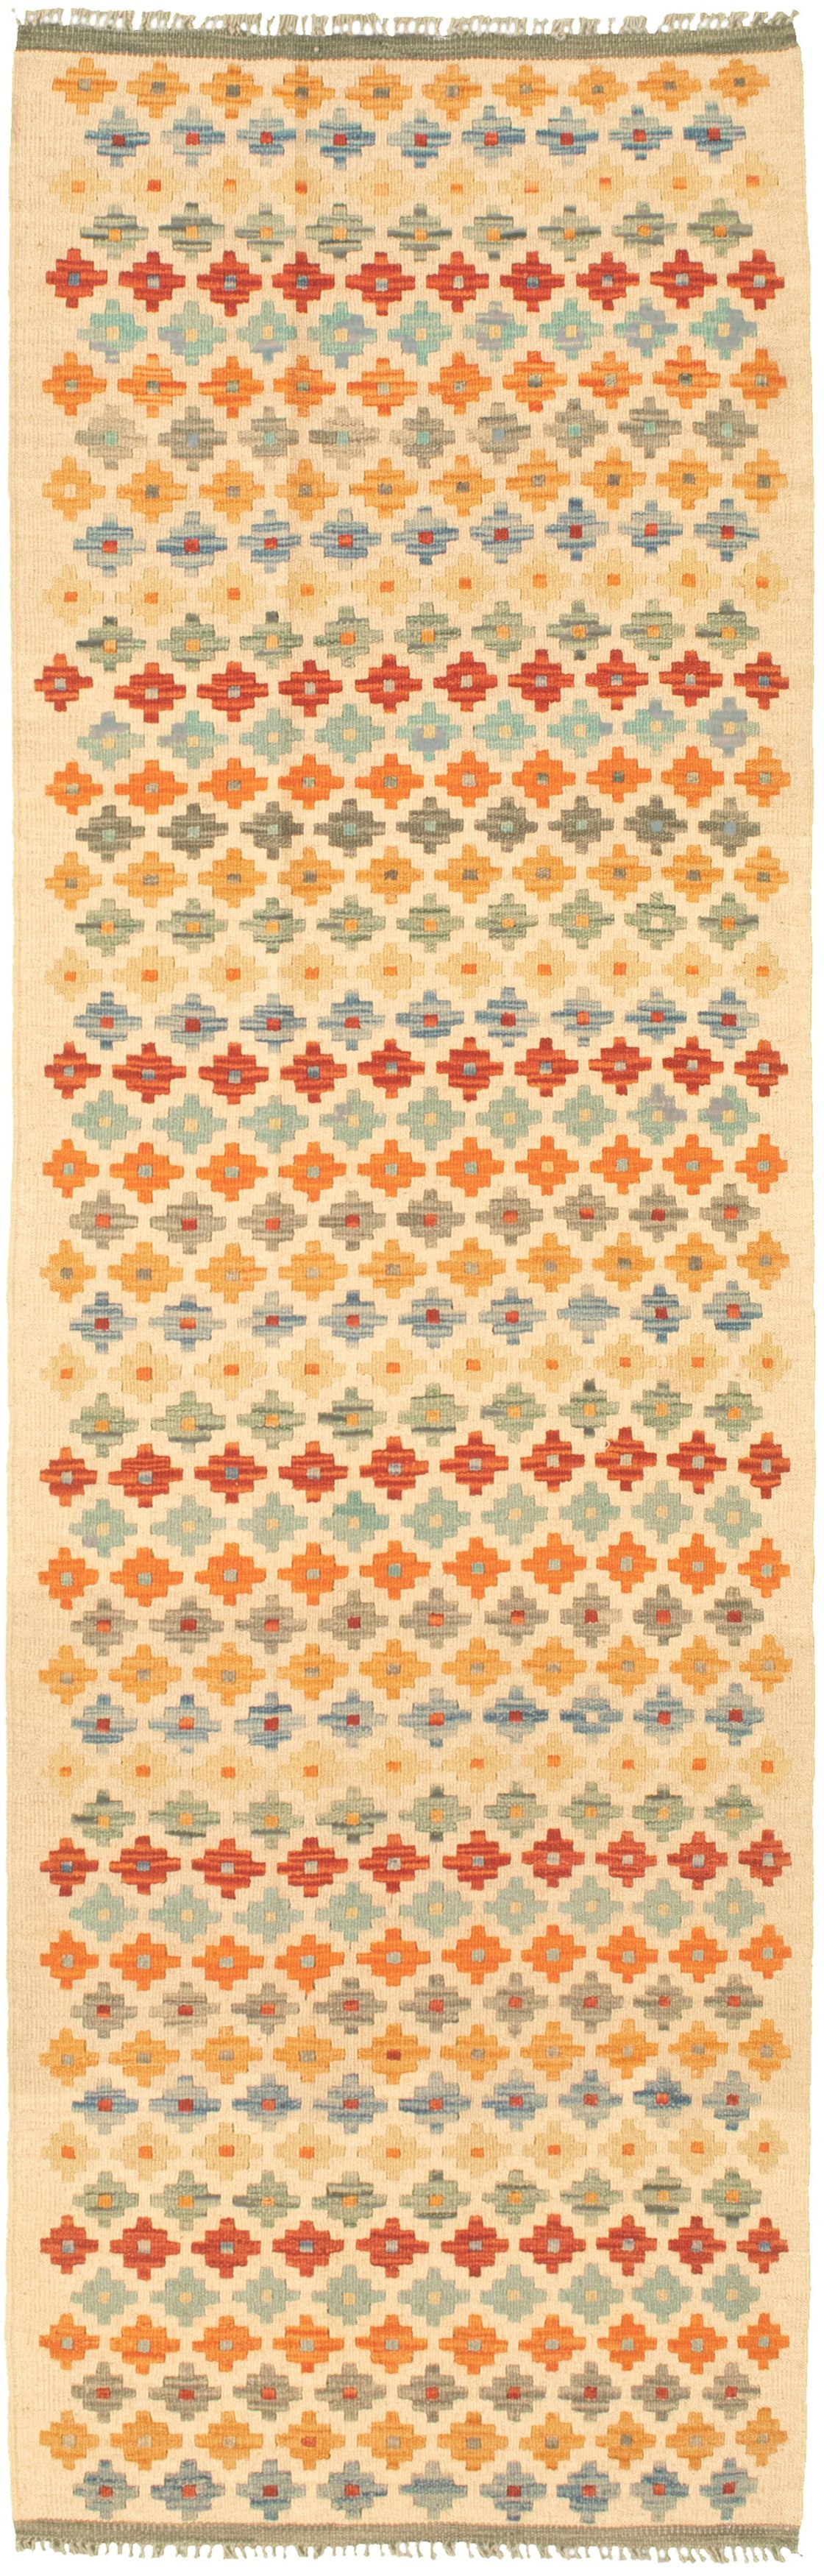 Hand woven Bold and Colorful  Cream Wool Kilim 2'6" x 8'3" Size: 2'6" x 8'3"  